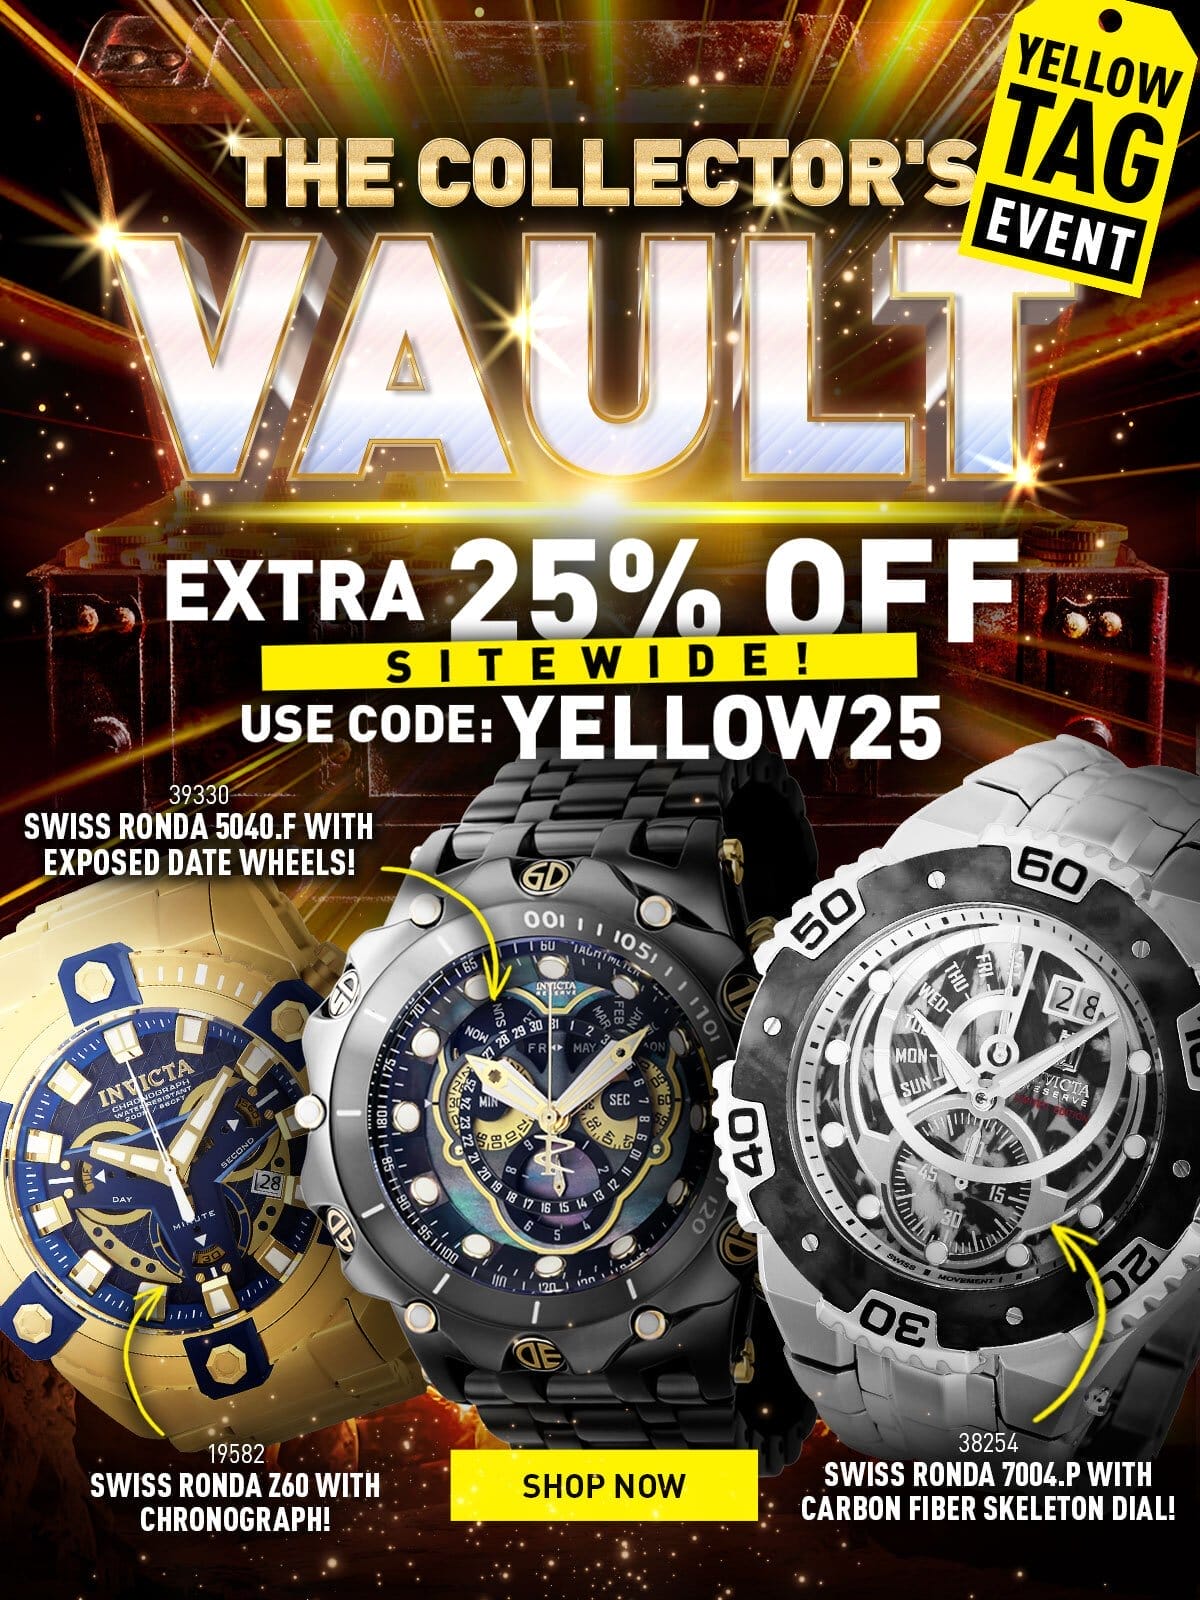 The collector's vault - Extra 25% off